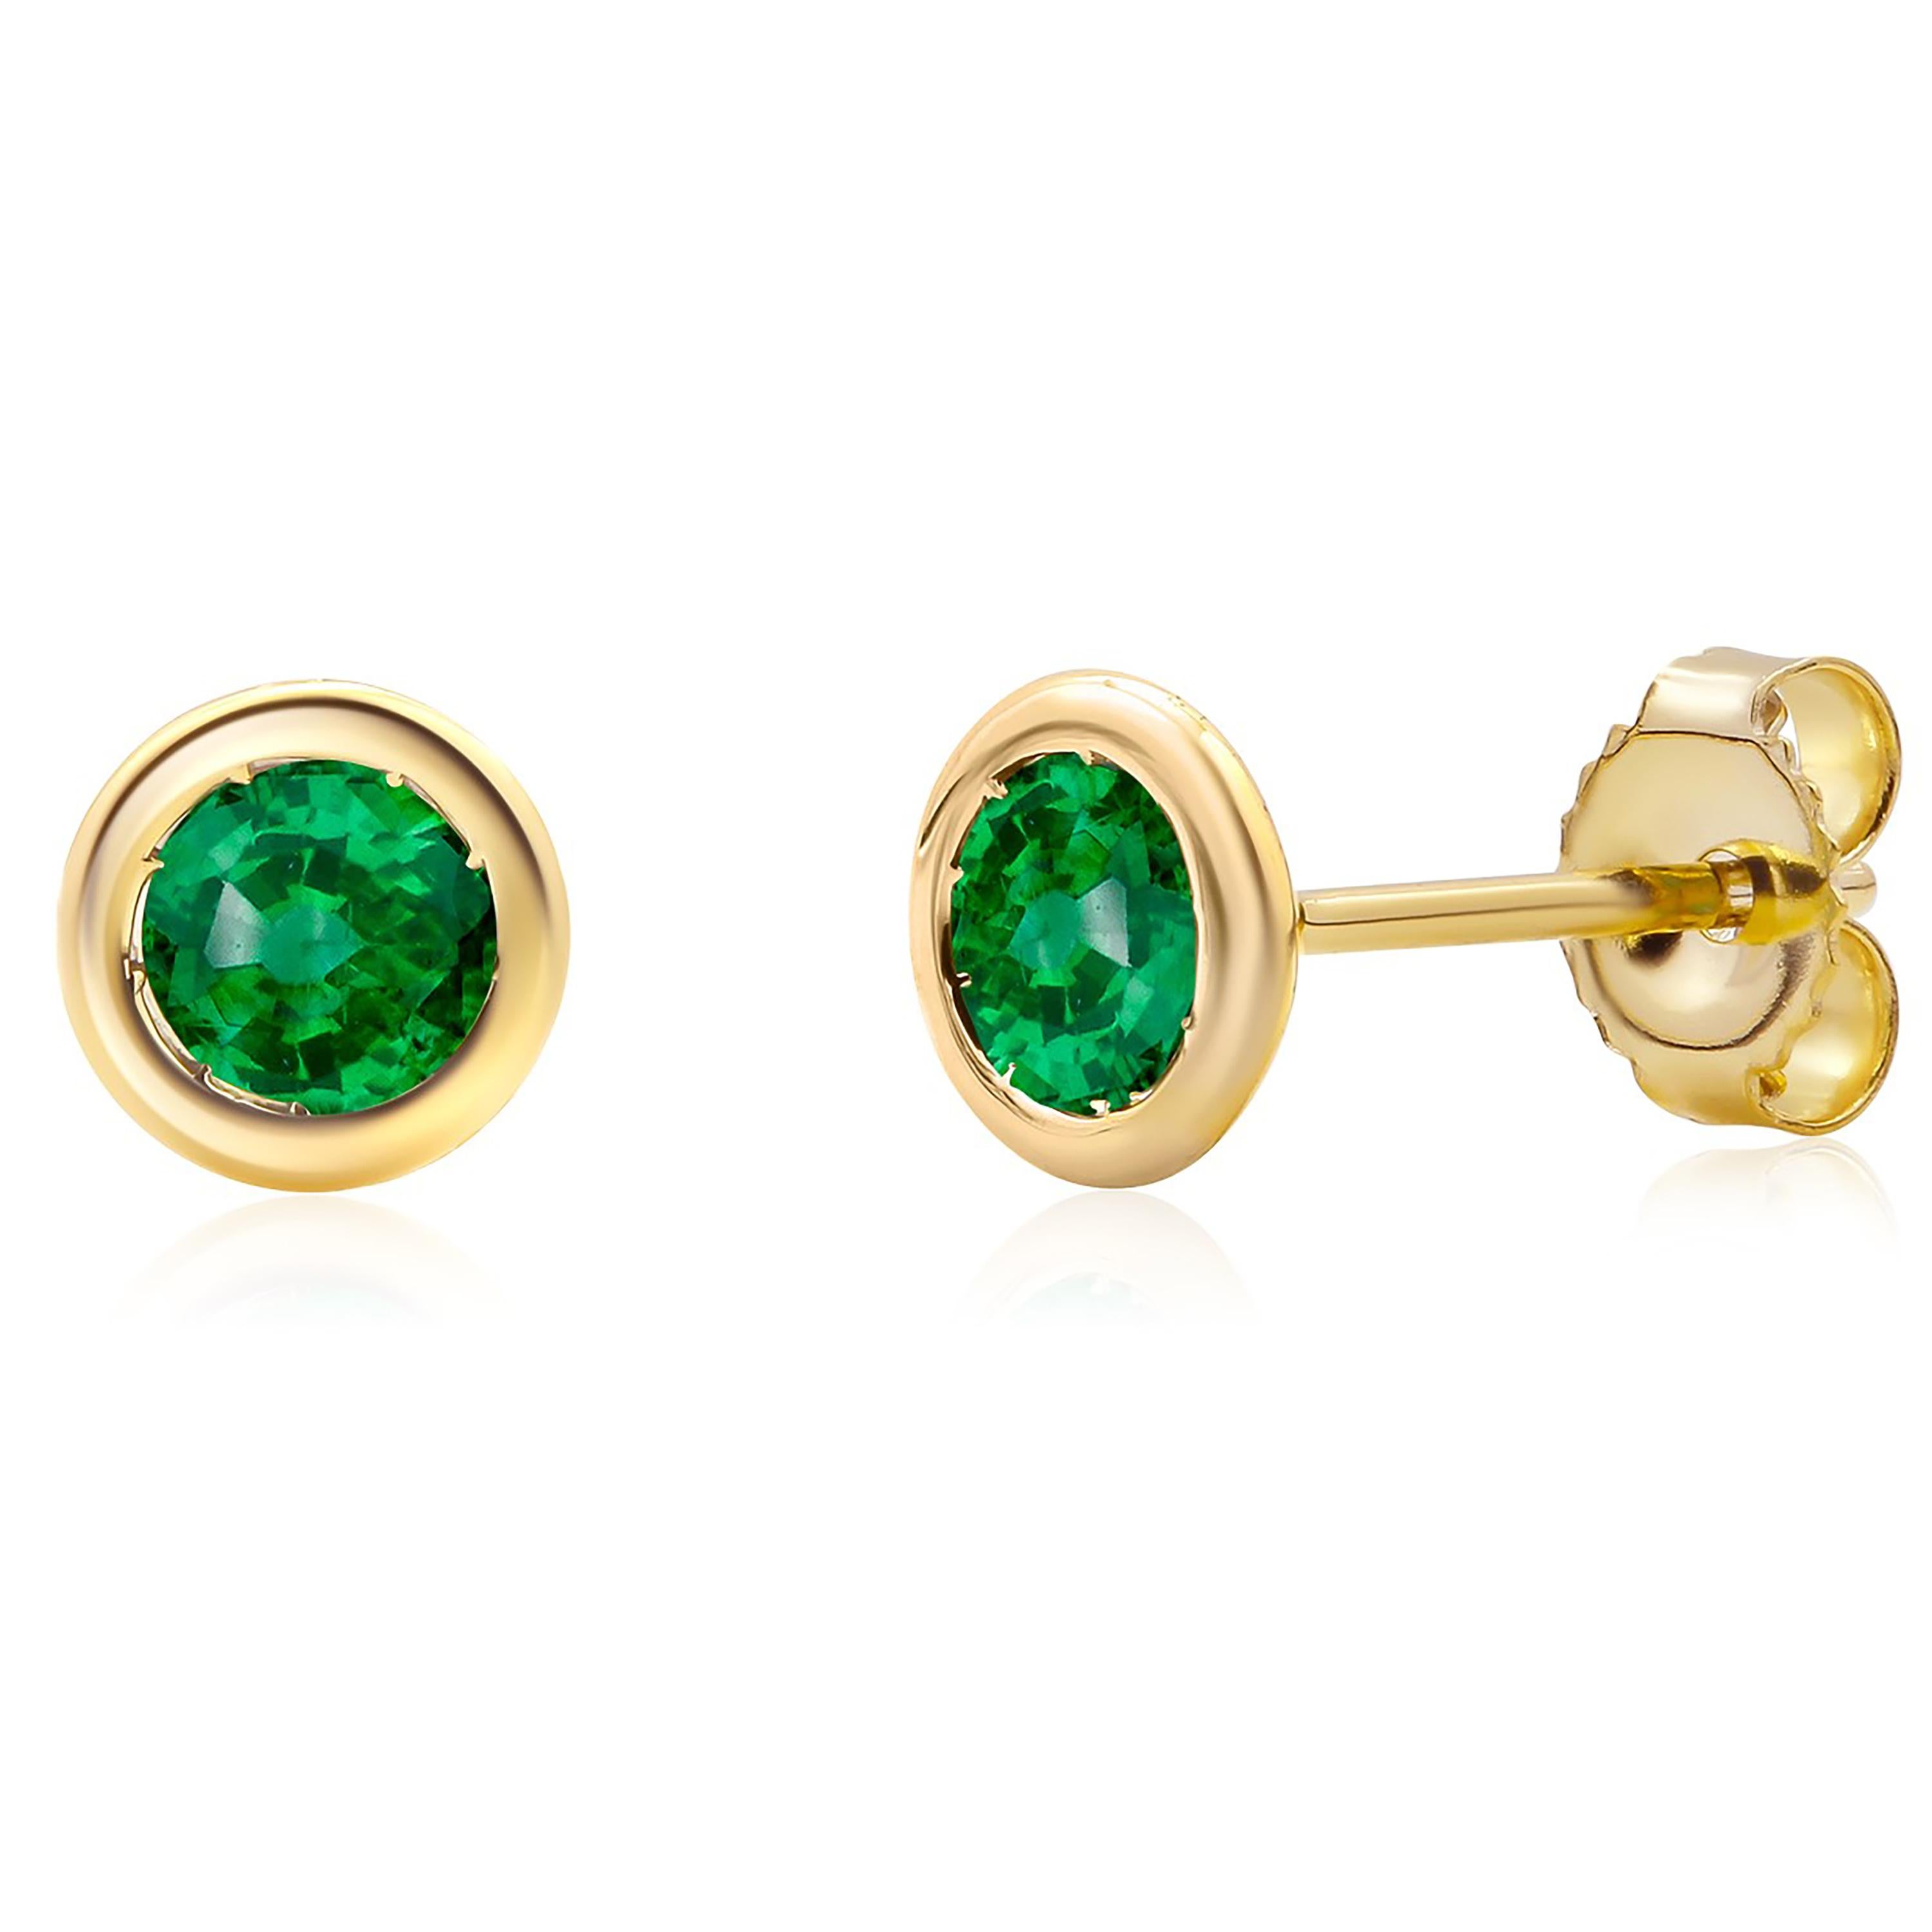 Round Cut Matched Round Emerald 0.40 Carats Bezel Set Yellow Gold 0.23 Inch Stud Earrings